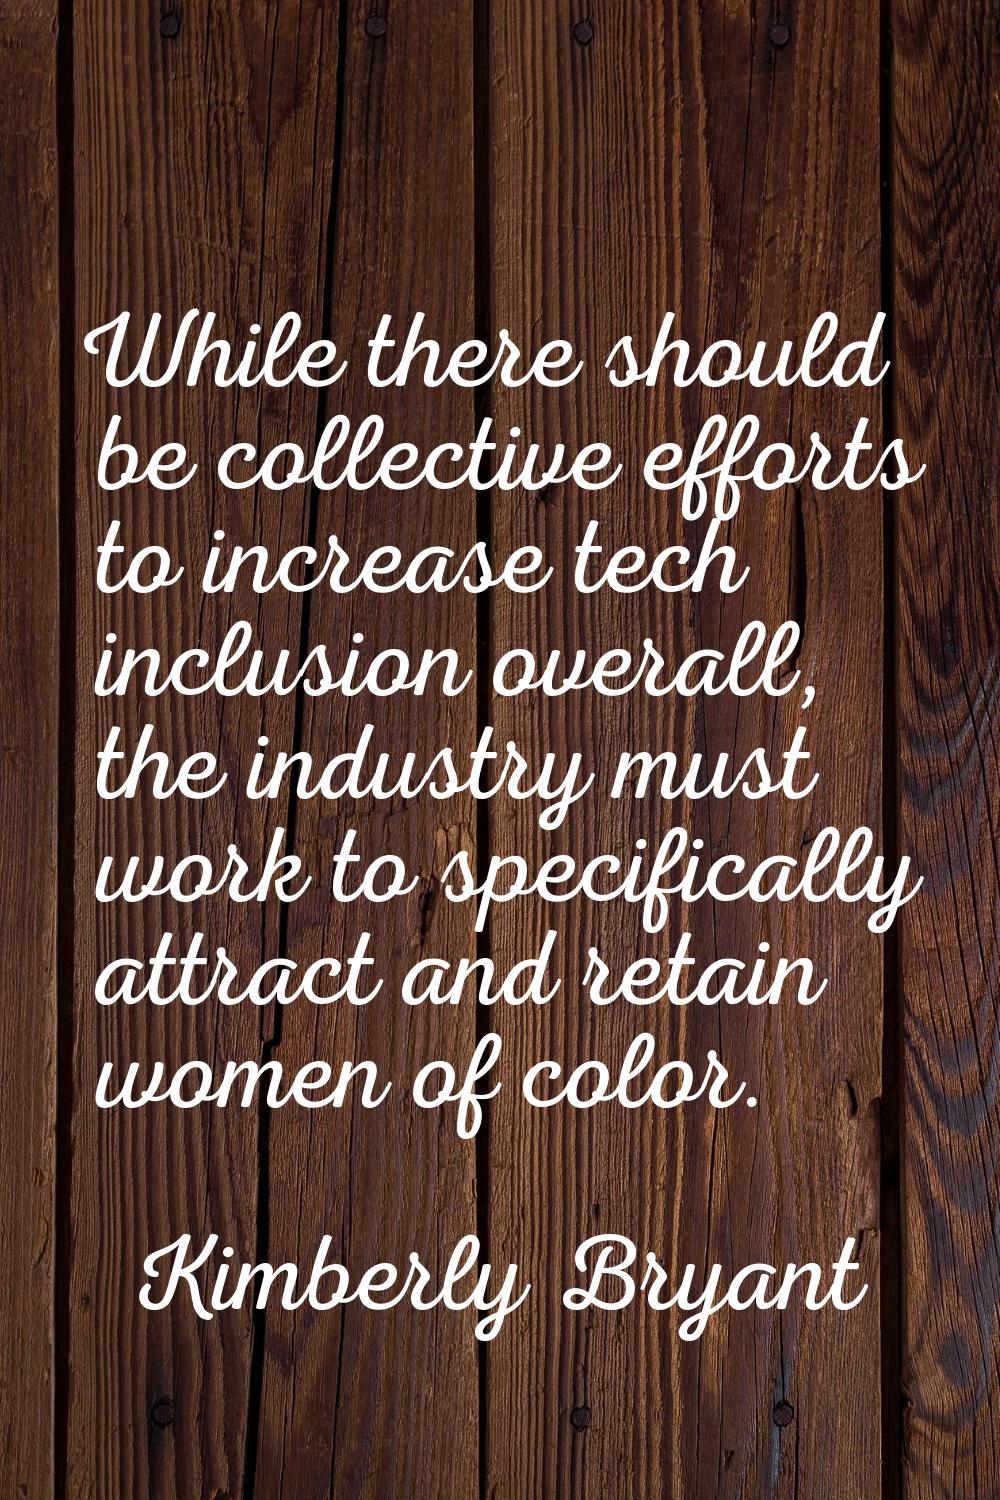 While there should be collective efforts to increase tech inclusion overall, the industry must work